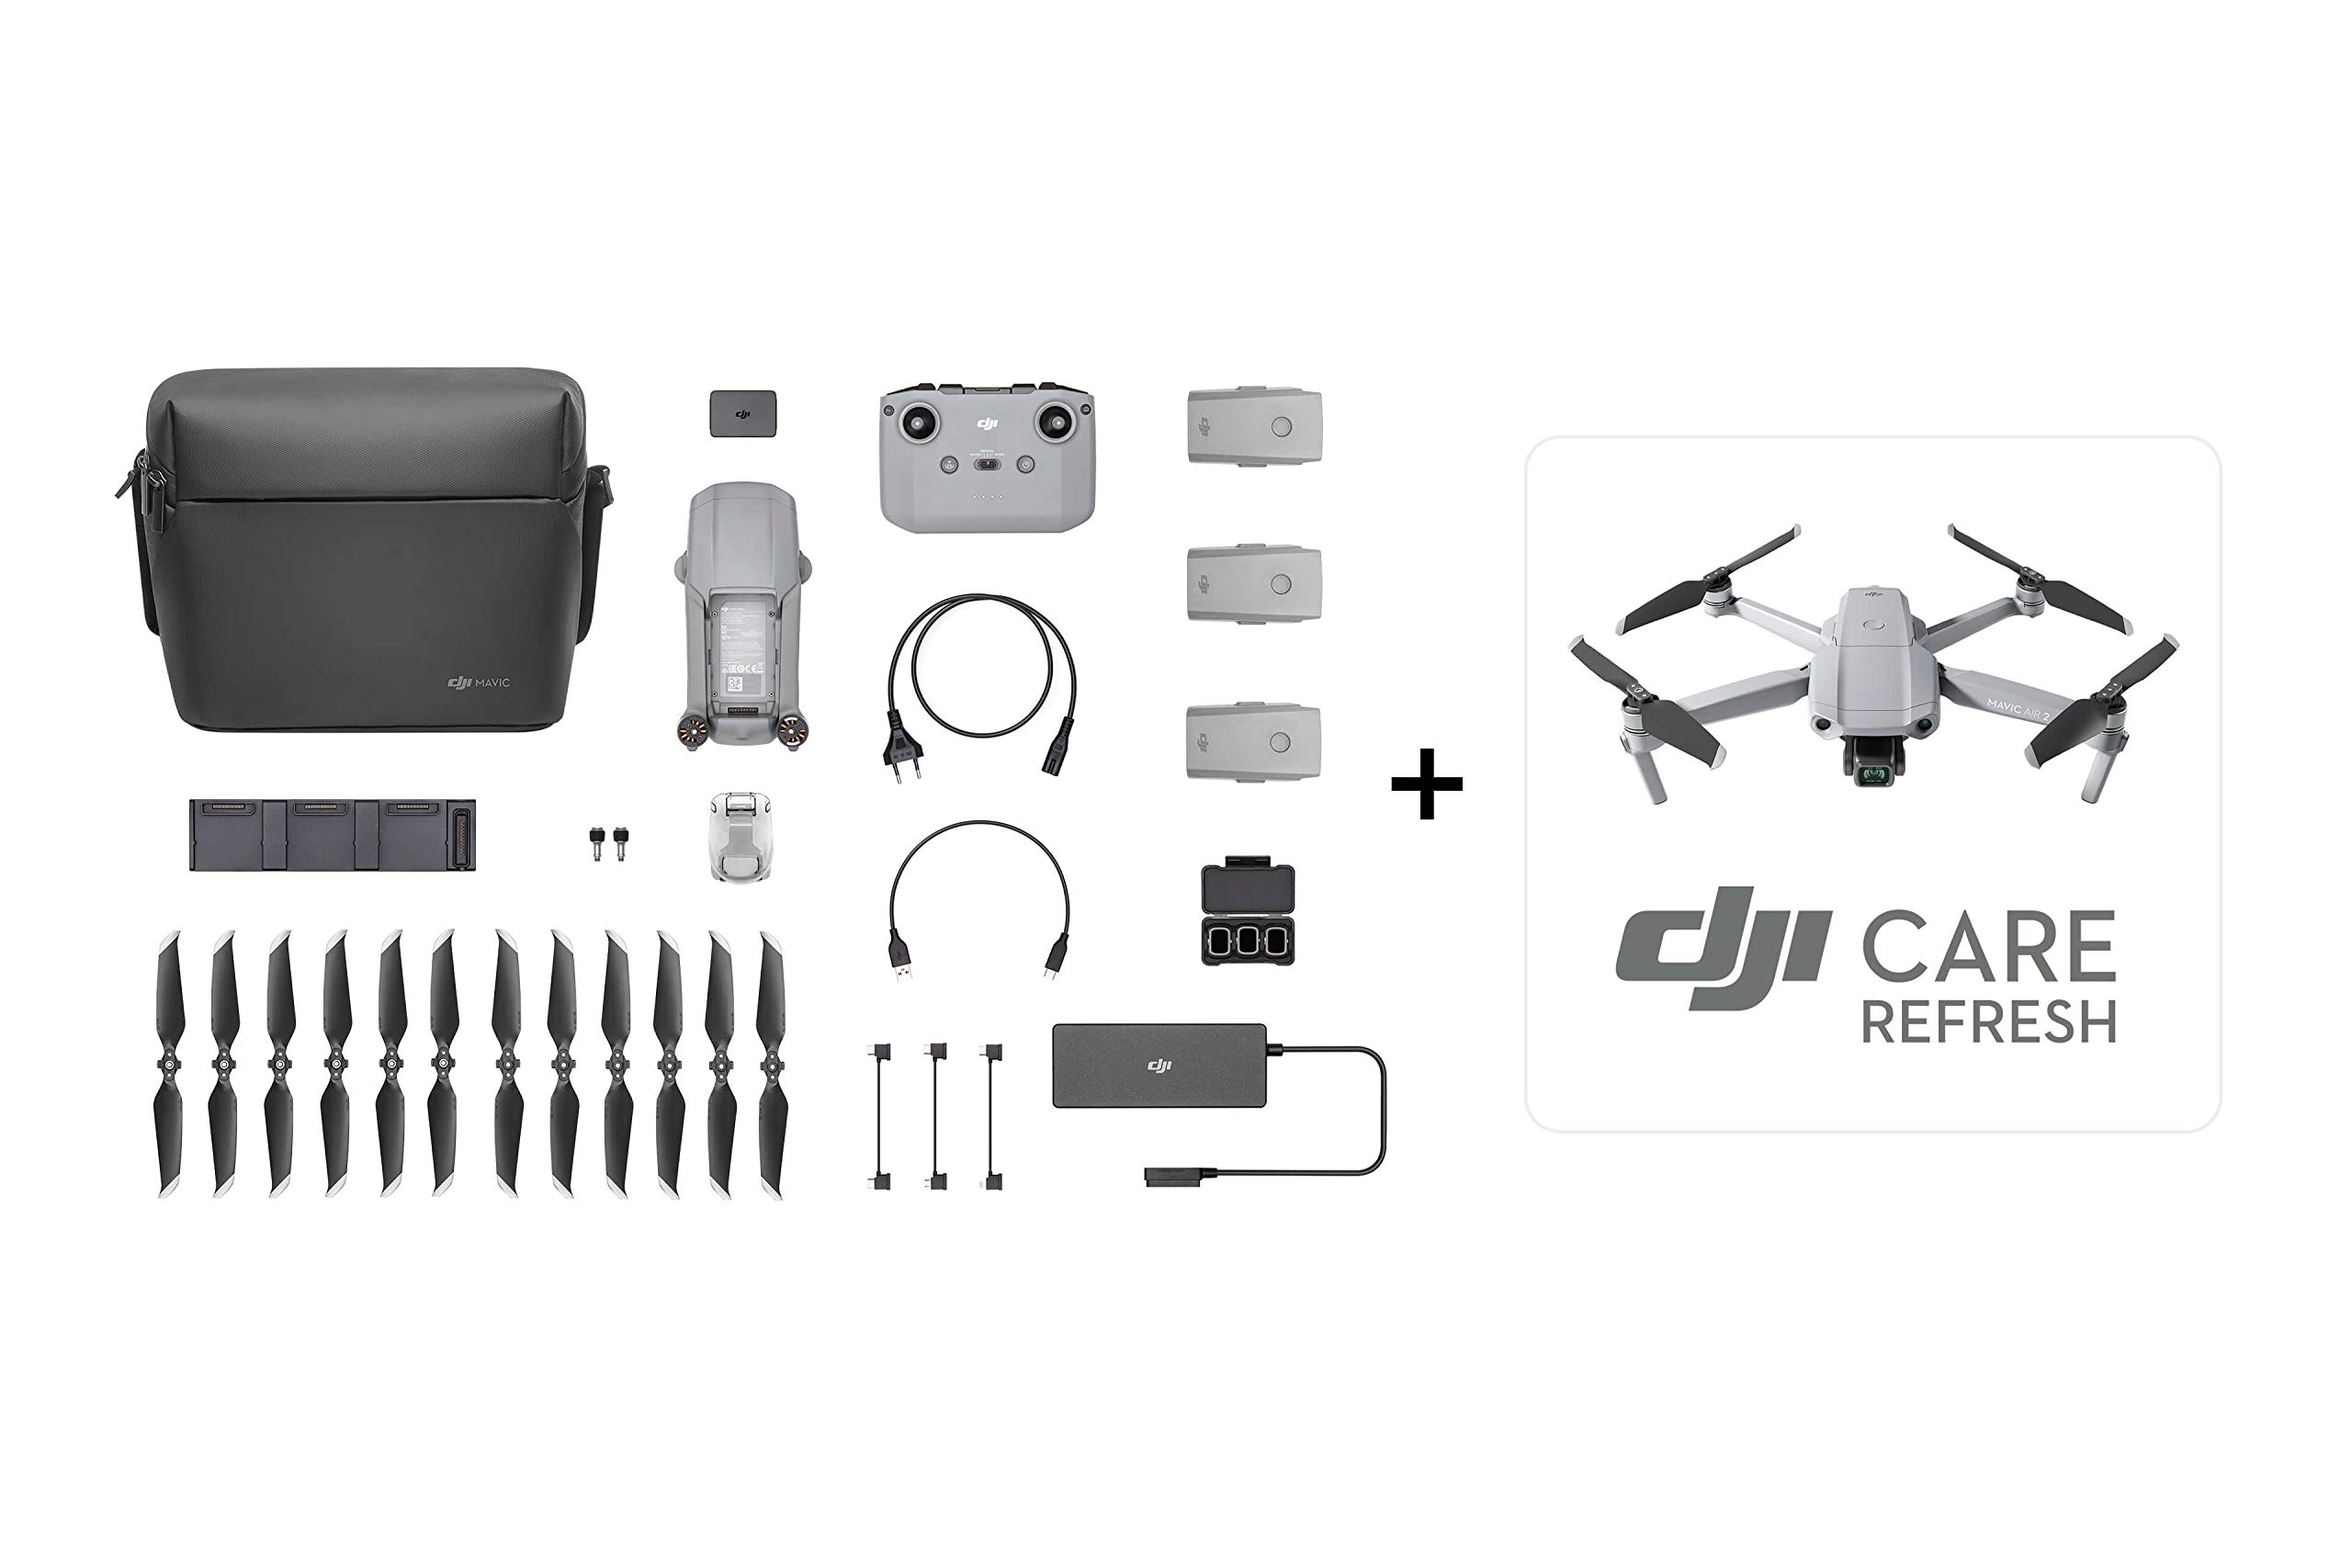 DJI Mavic Air 2 Fly More Combo & Auto-Activated DJI Care Refresh Bundle-Drone Quadcopter UAV with 48MP Camera 4K Video 1/2